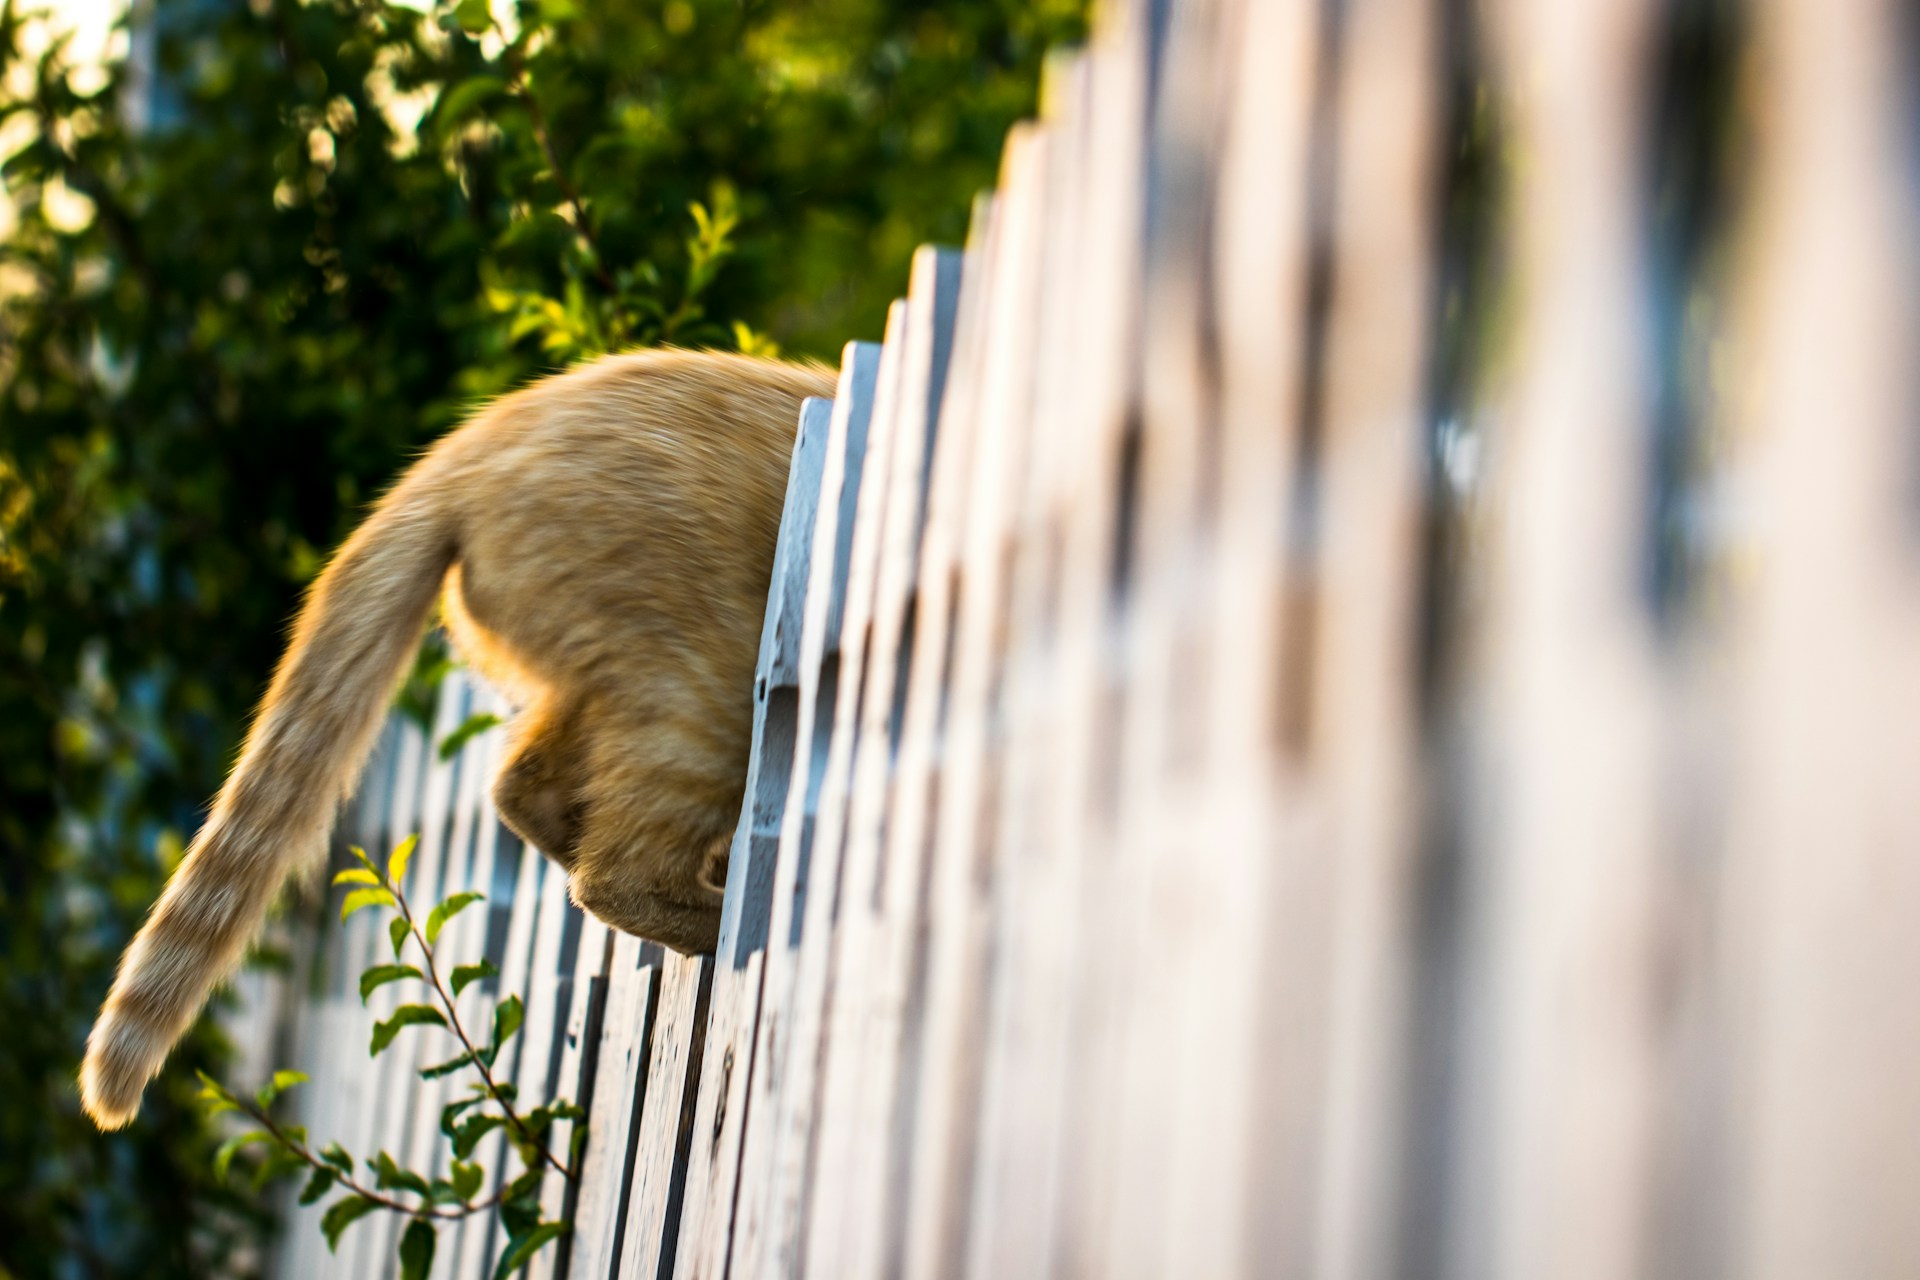 A cat escaping home by jumping over the fence